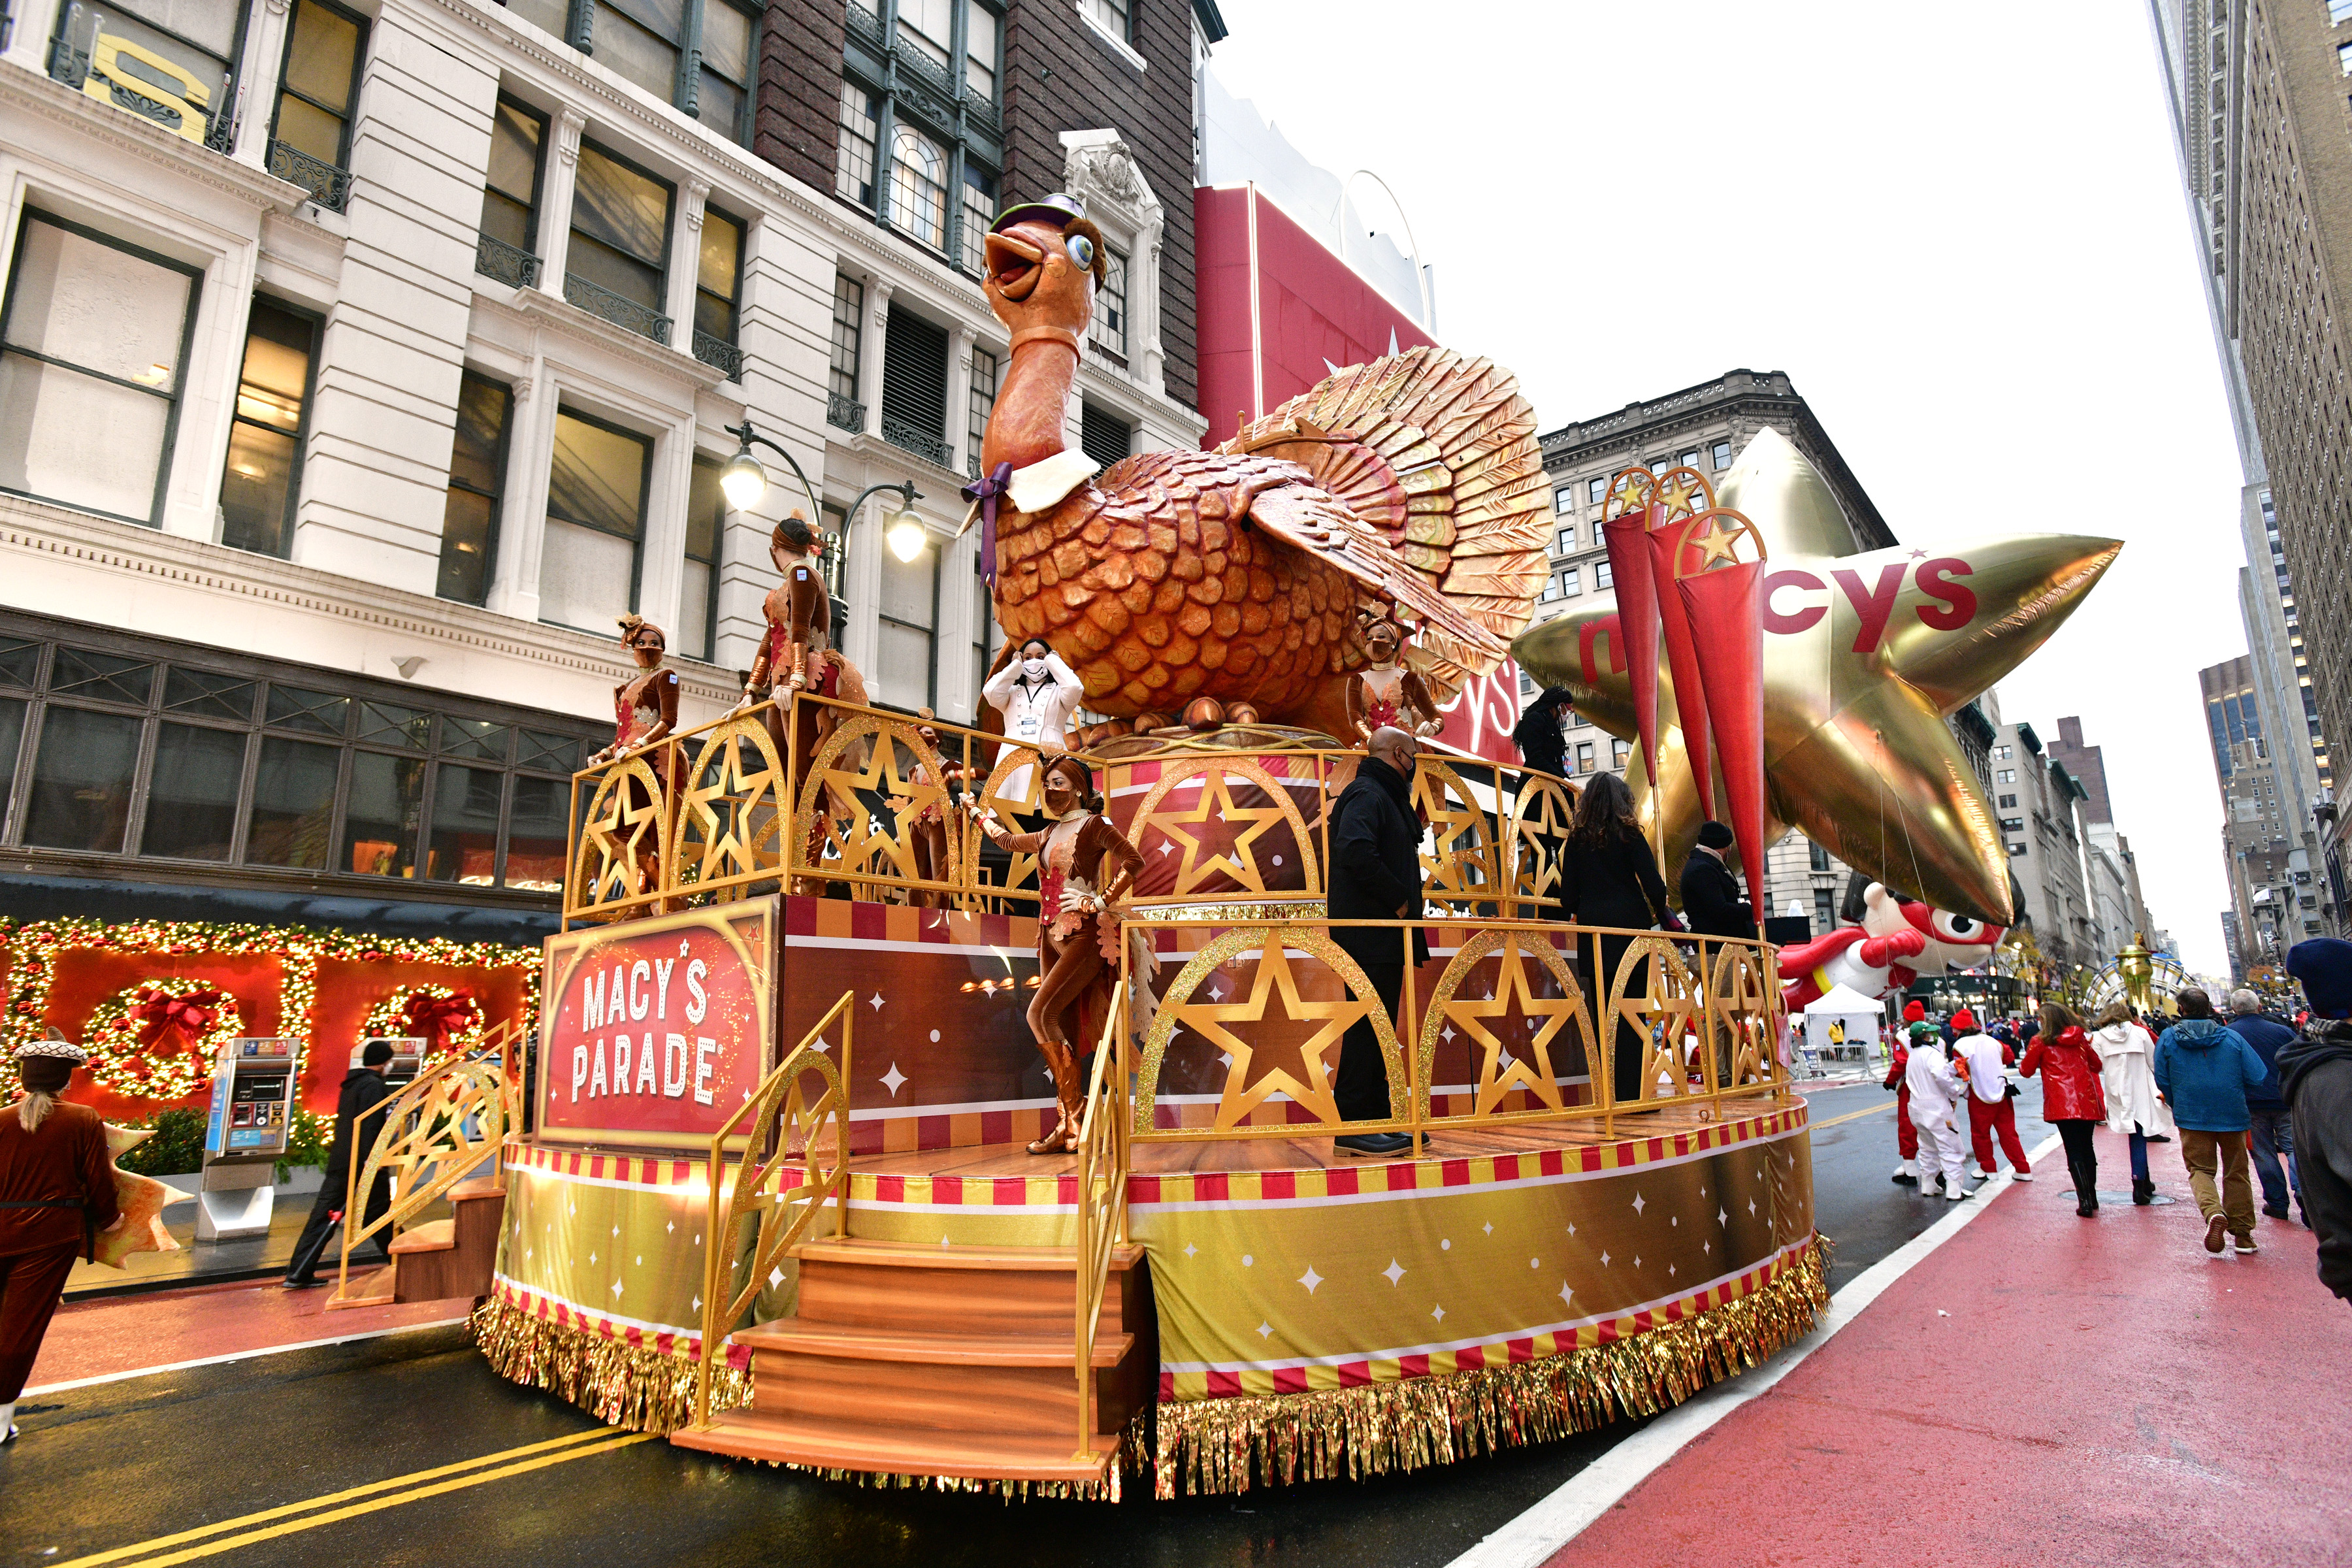 When Is The Macy's Thanksgiving Parade? 2021 Date, Route And Schedule